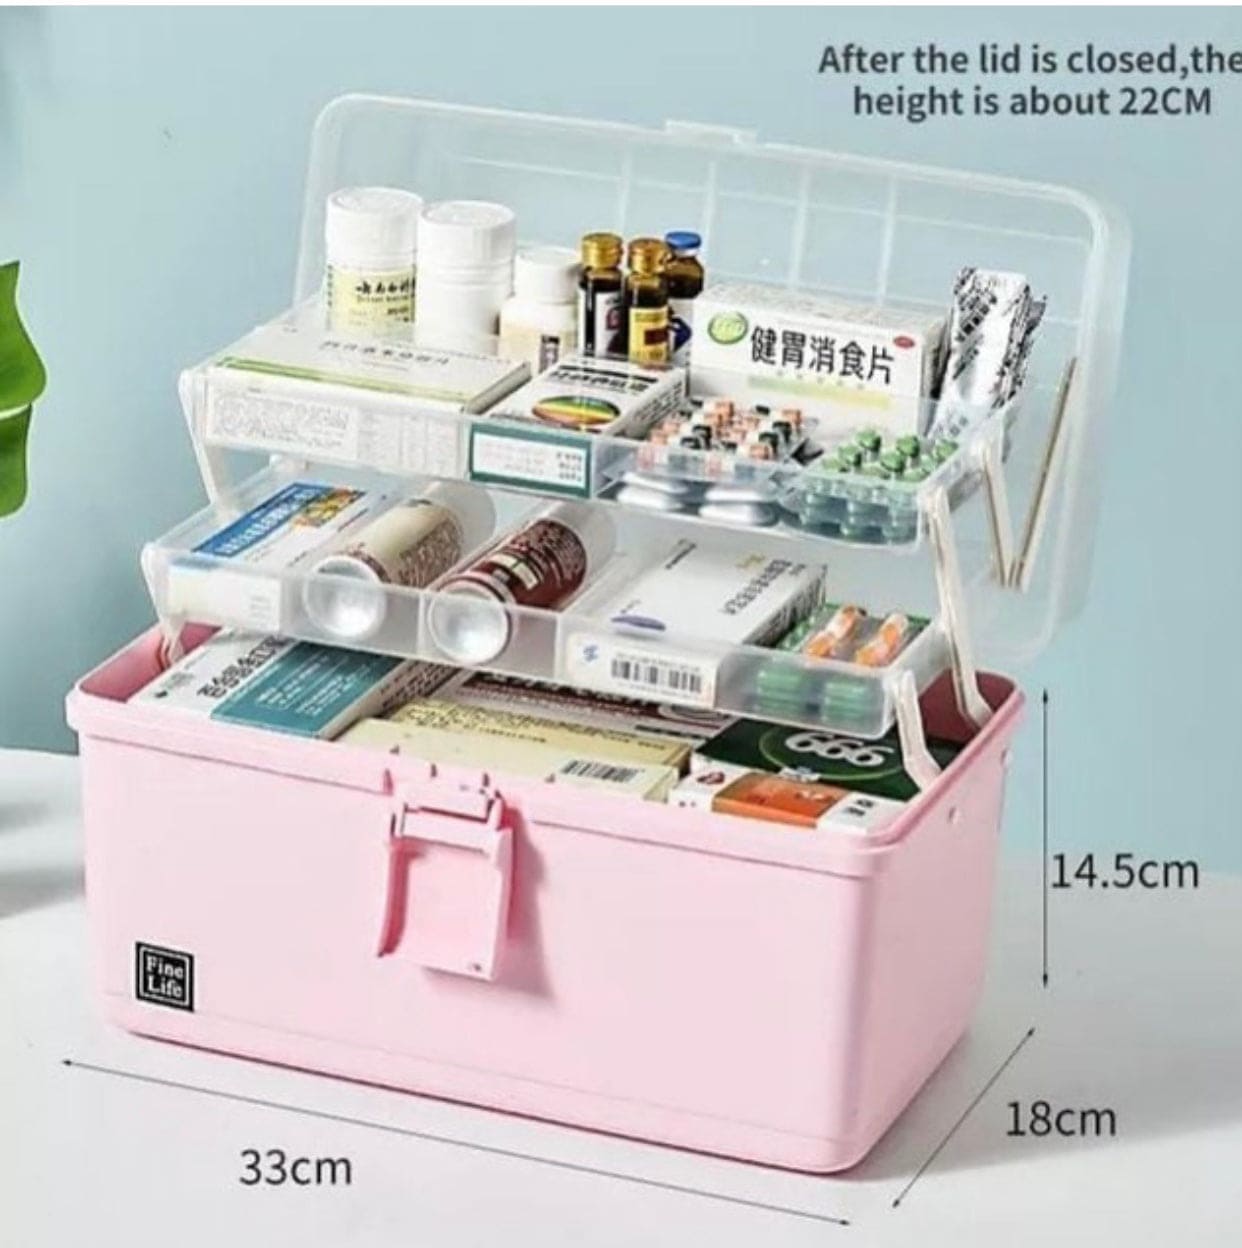 Large Capacity First Aid Container, Plastic Organizers Medicine Storage Box, 3 Layer Portable Medicine Box, Emergency Family First Aid Kit